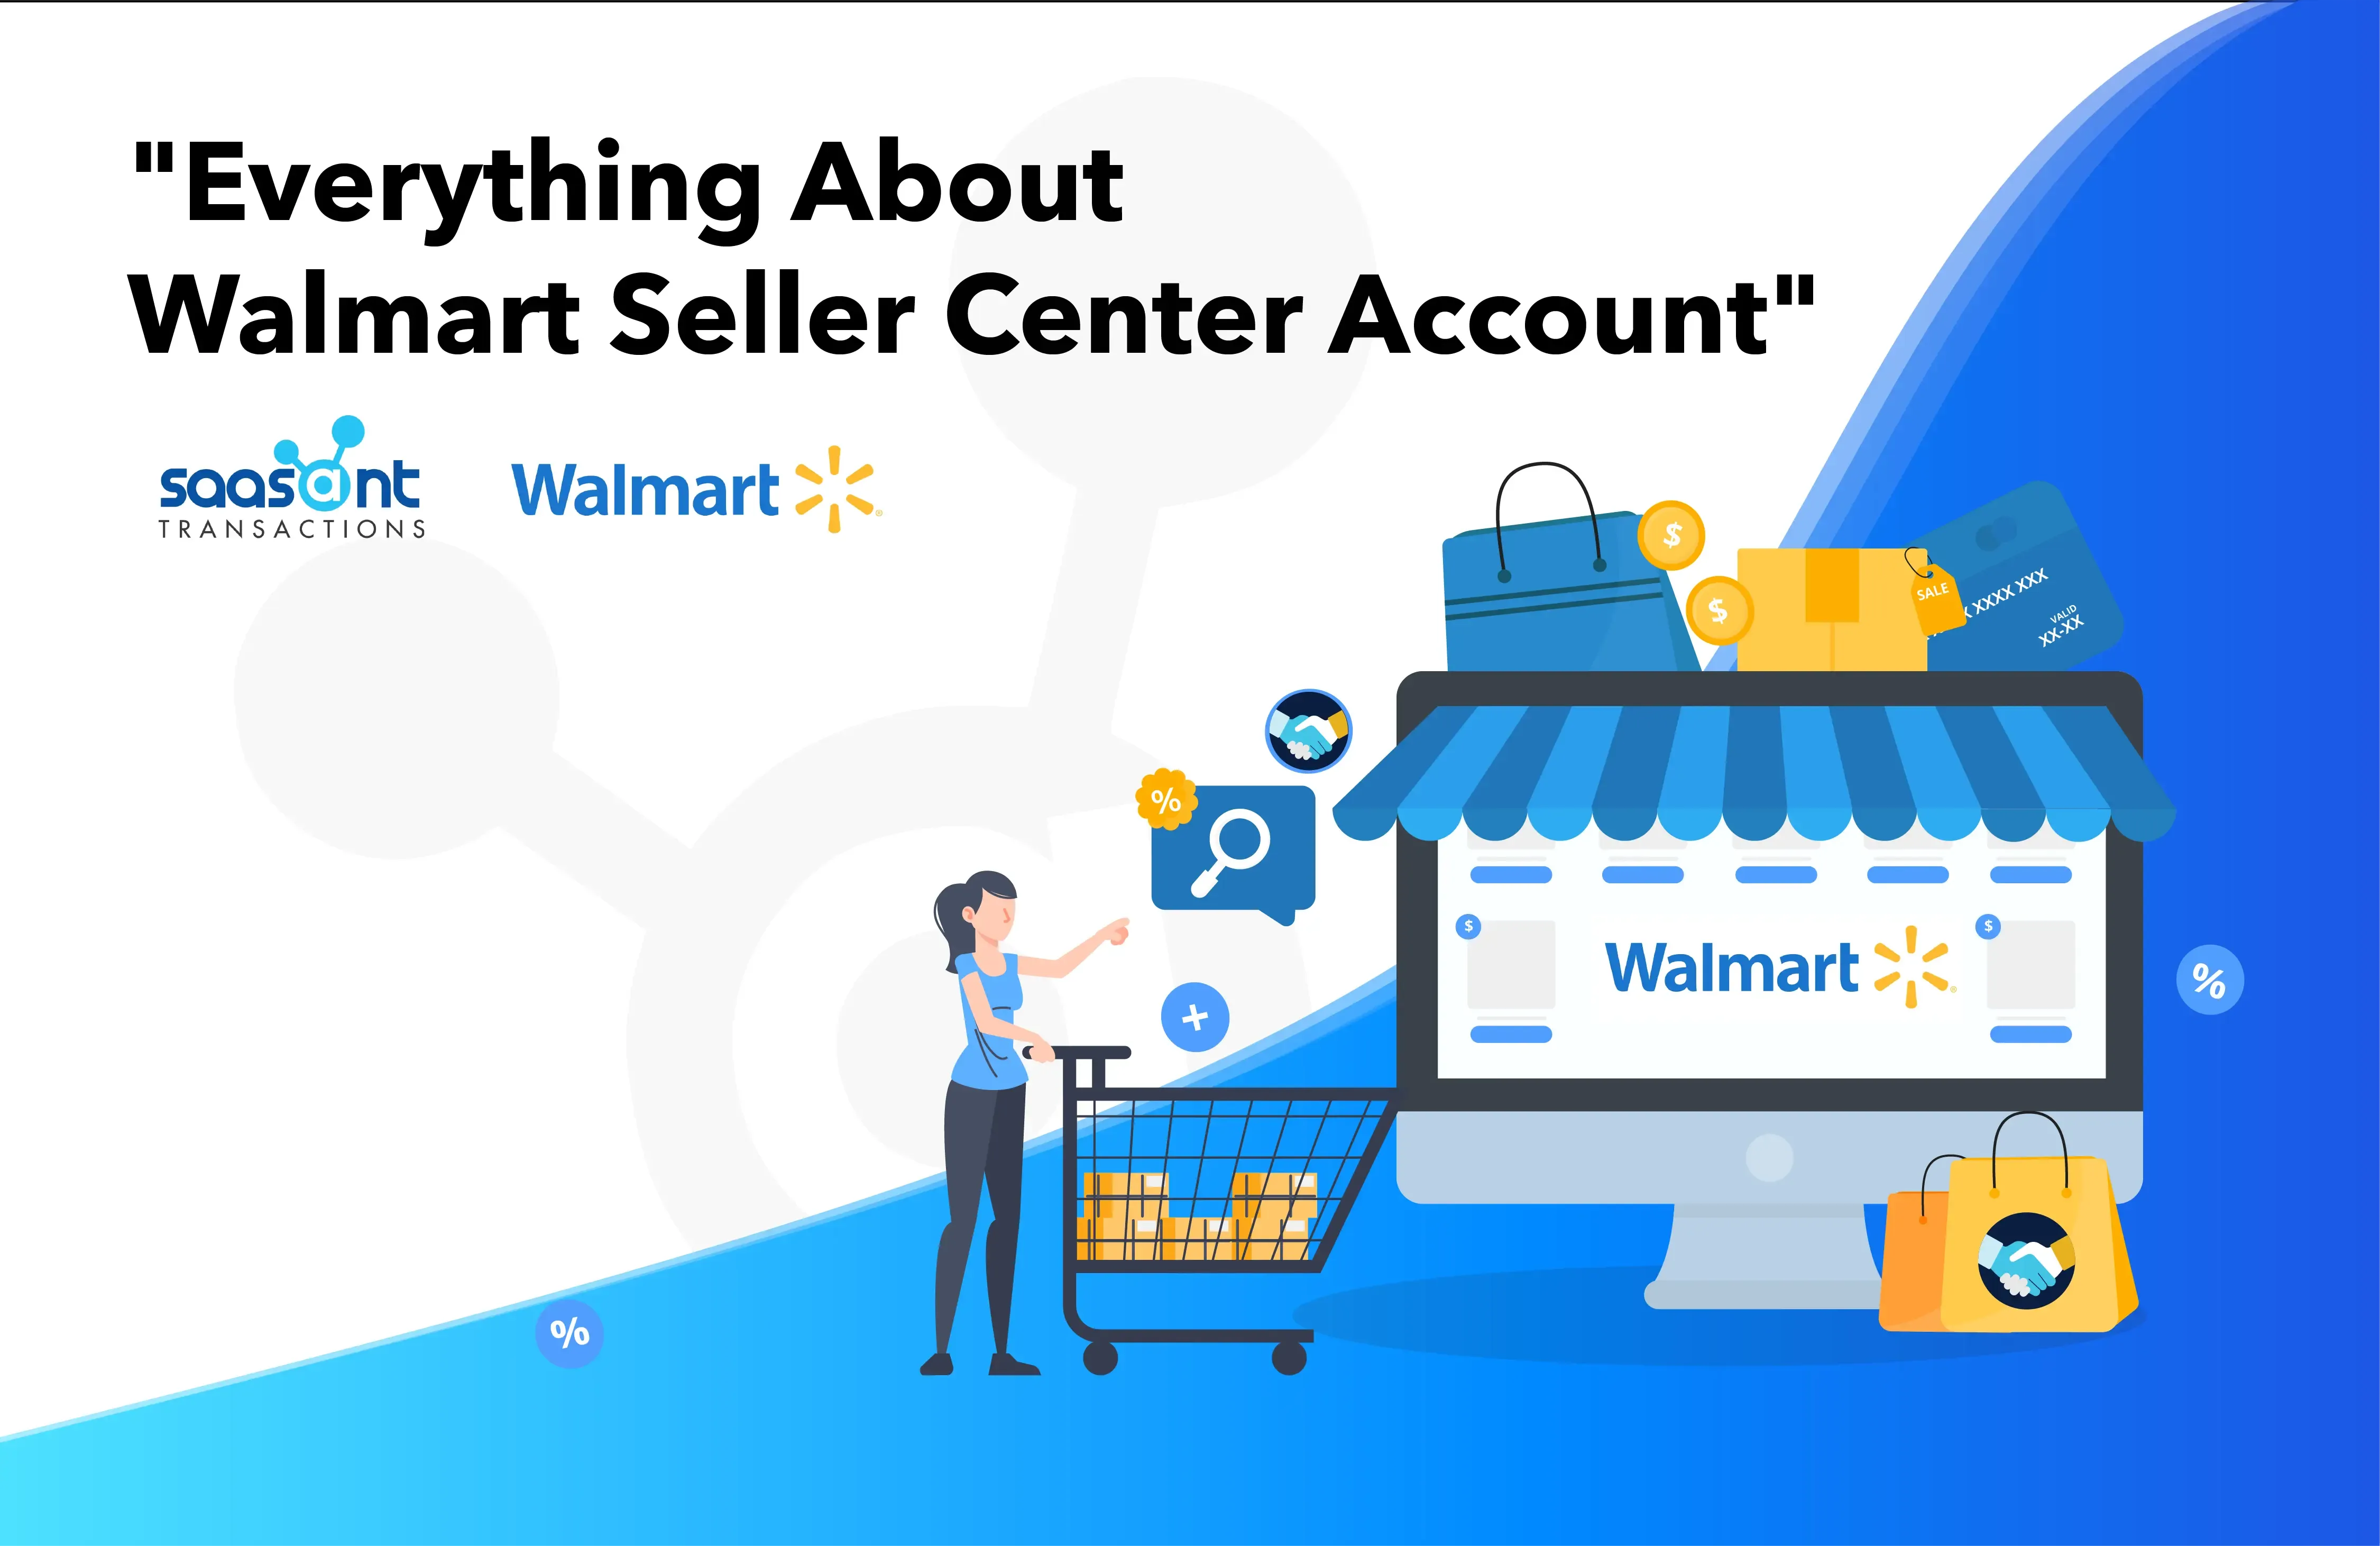 What is the Walmart Pro Seller Badge? And How to Get It (UPDATED) - Ecom  Circles